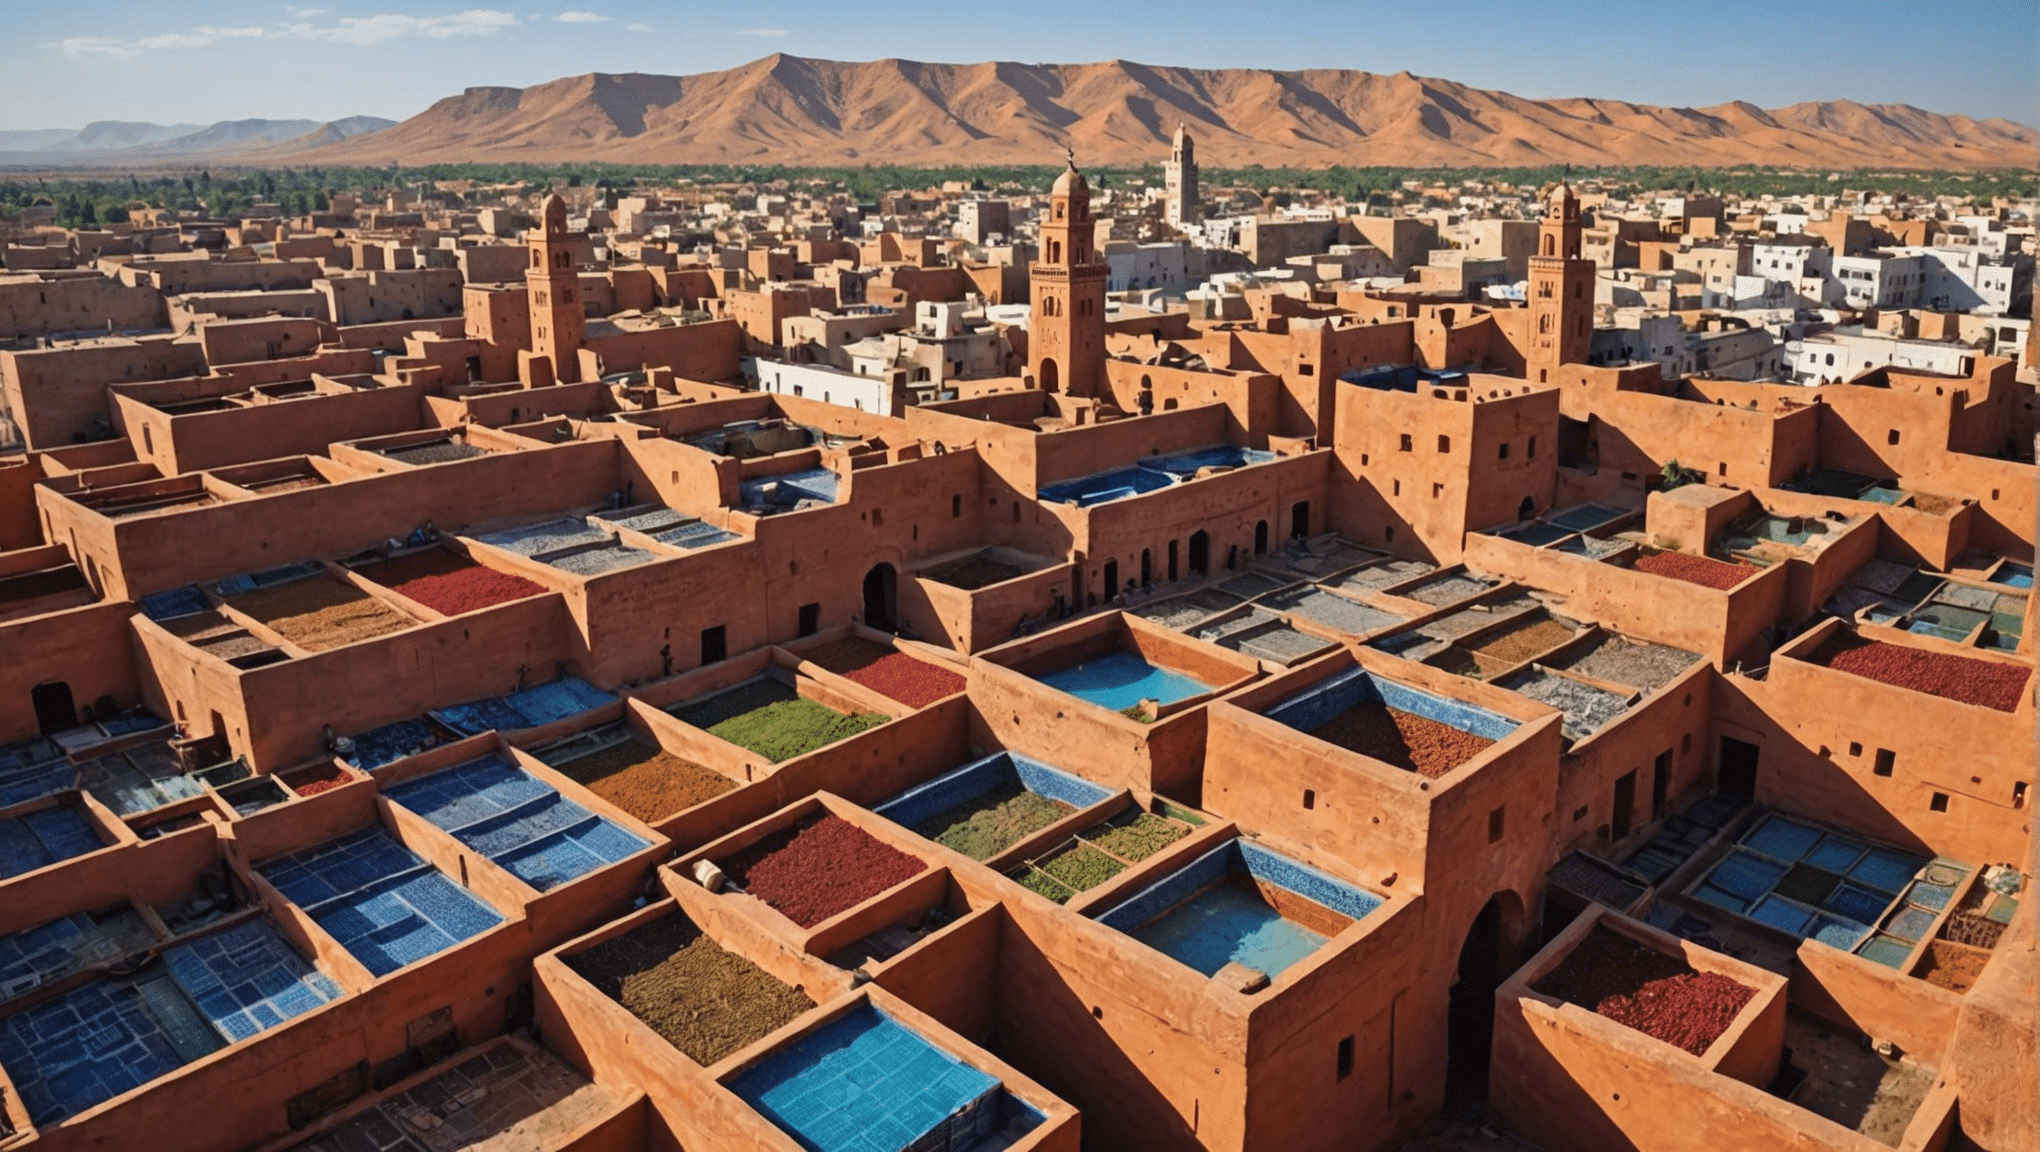 find out if morocco is hot in may and plan your perfect trip with our expert tips and advice.